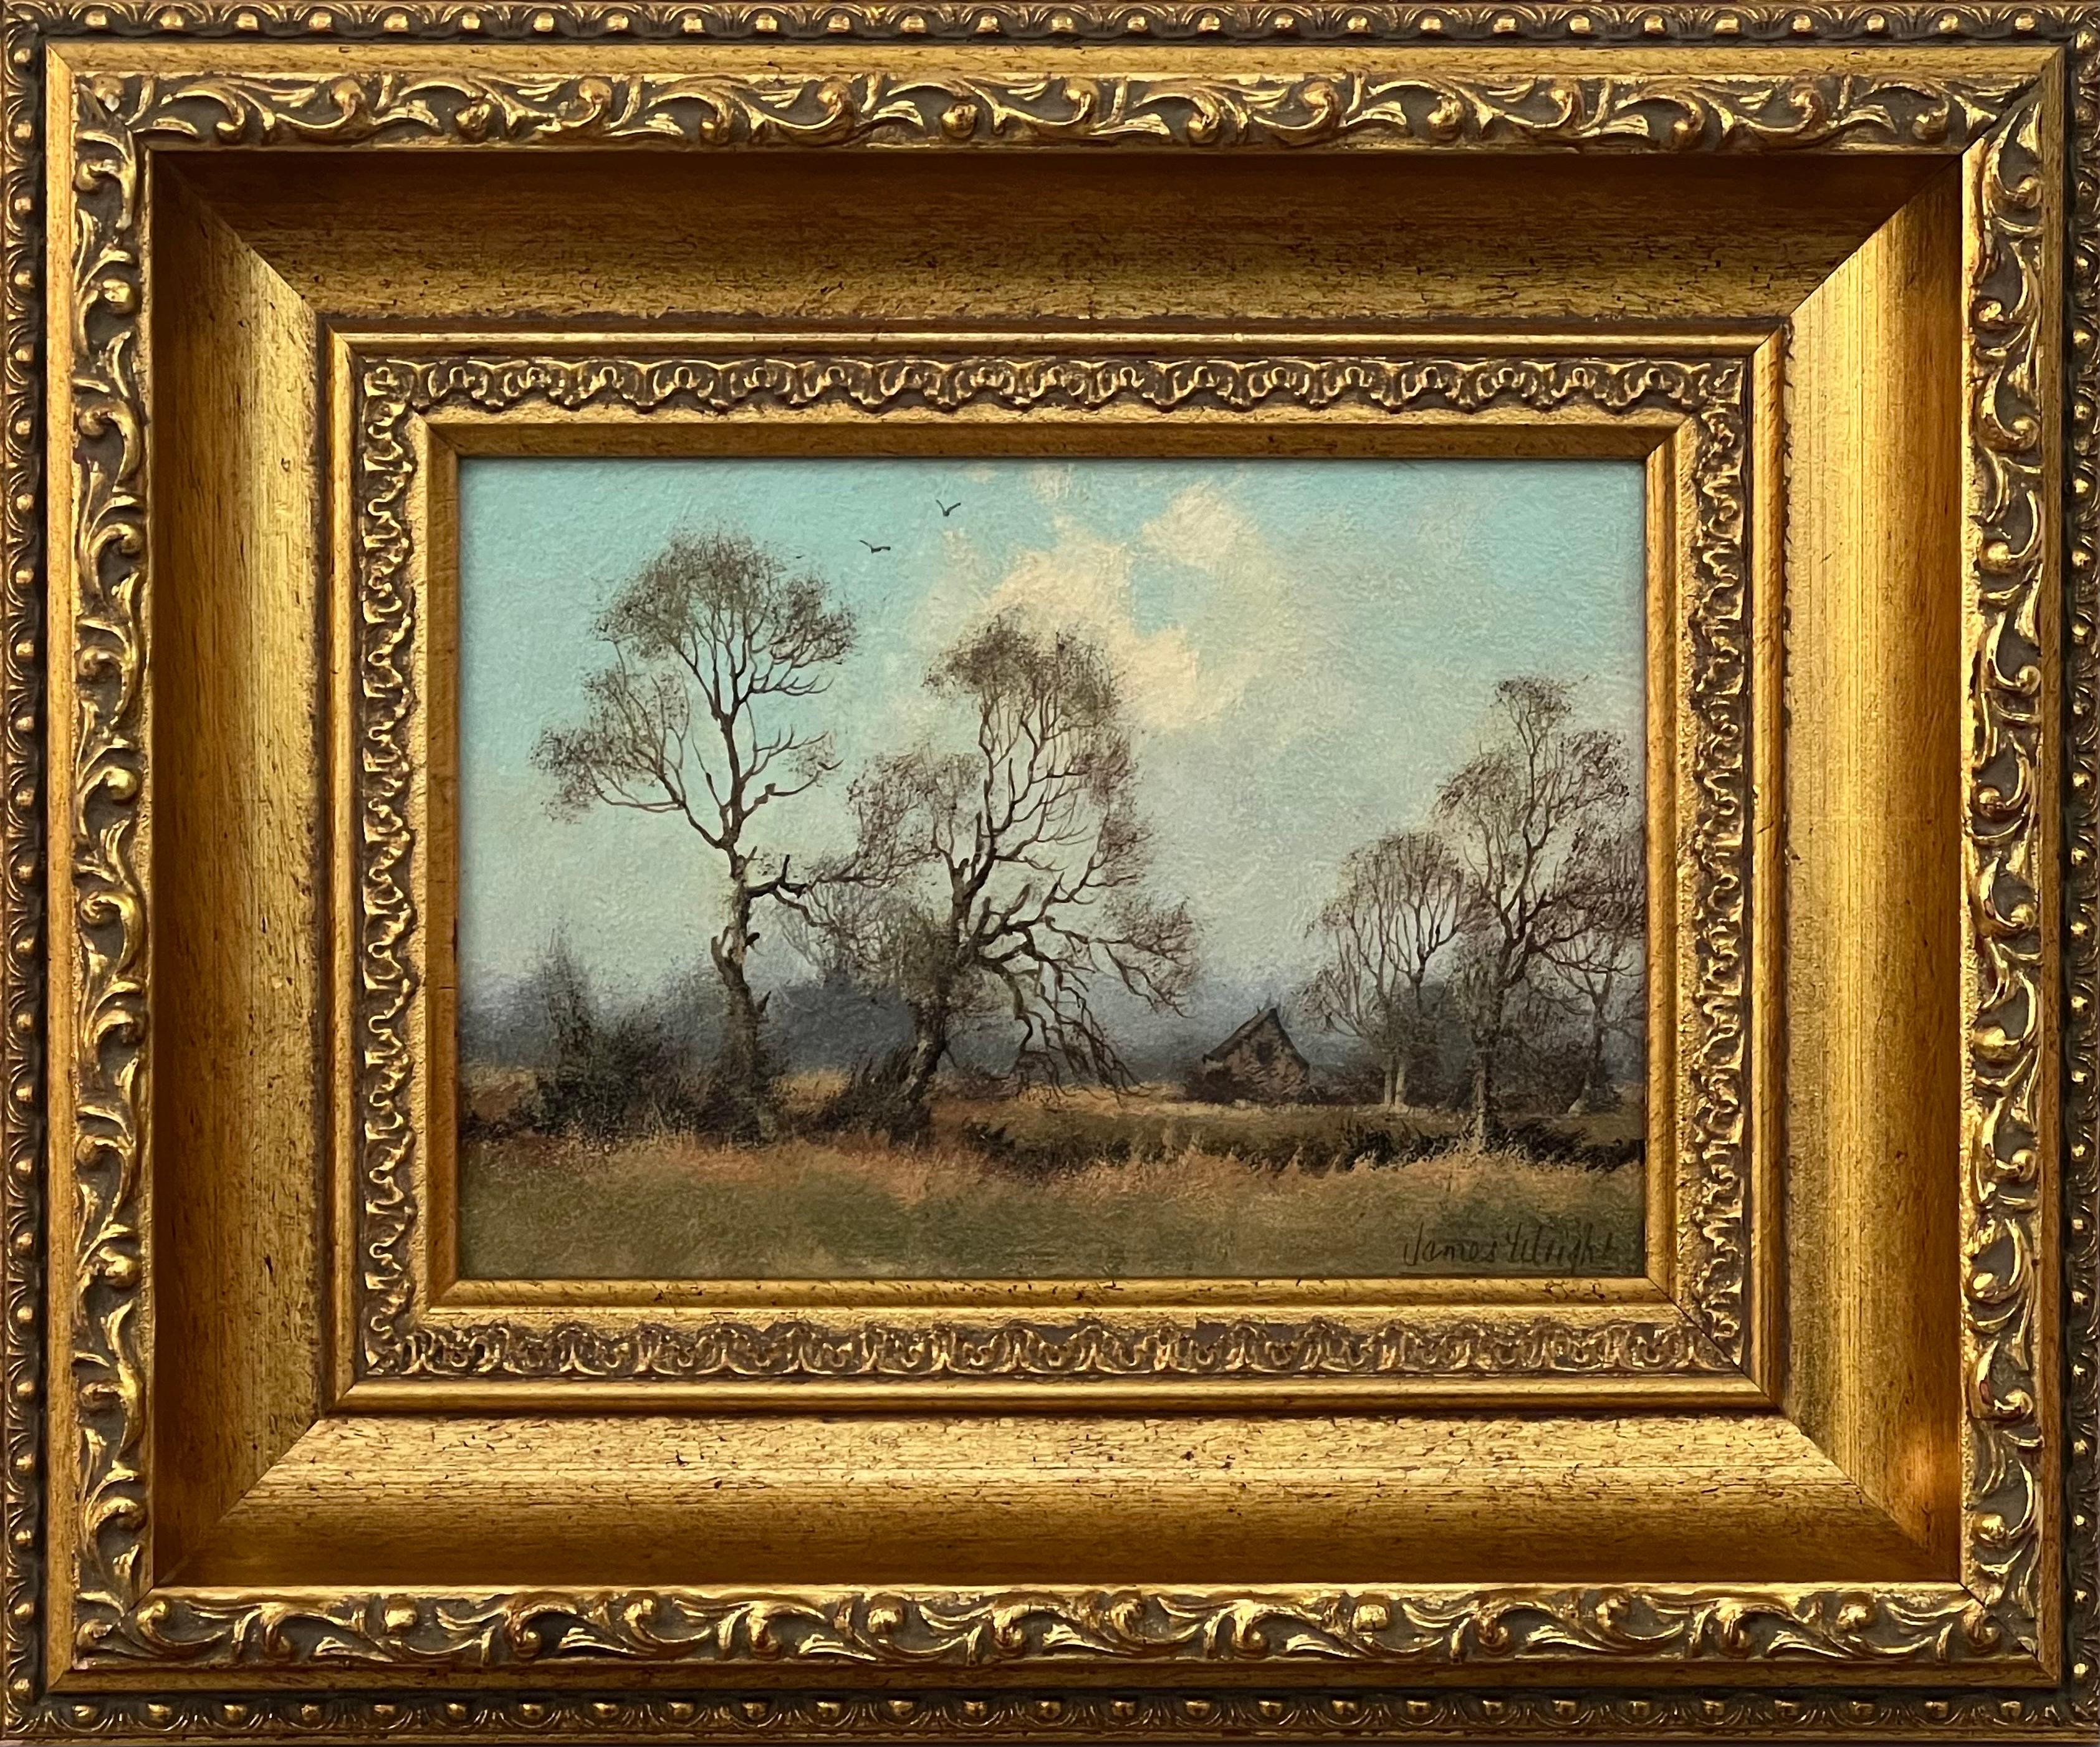 Landscape Painting James Wright - Trees & Cottage in the English Countryside par 20th Century Landscape Artist